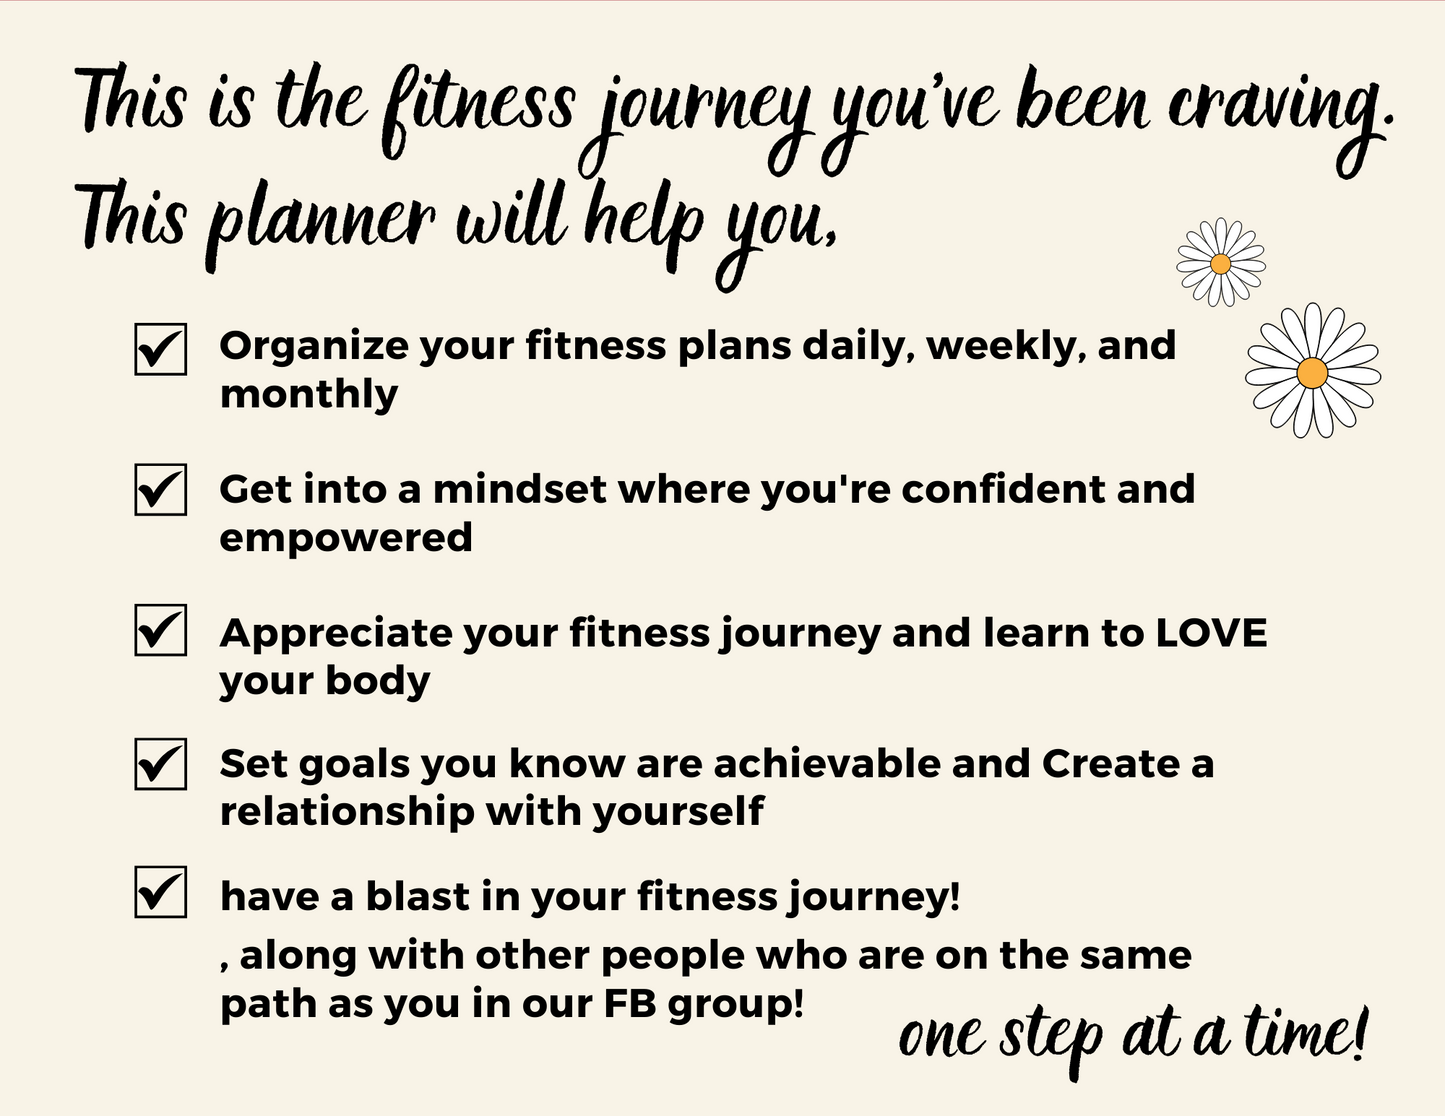 Digital Fitness planner. How it will help your fitness journey